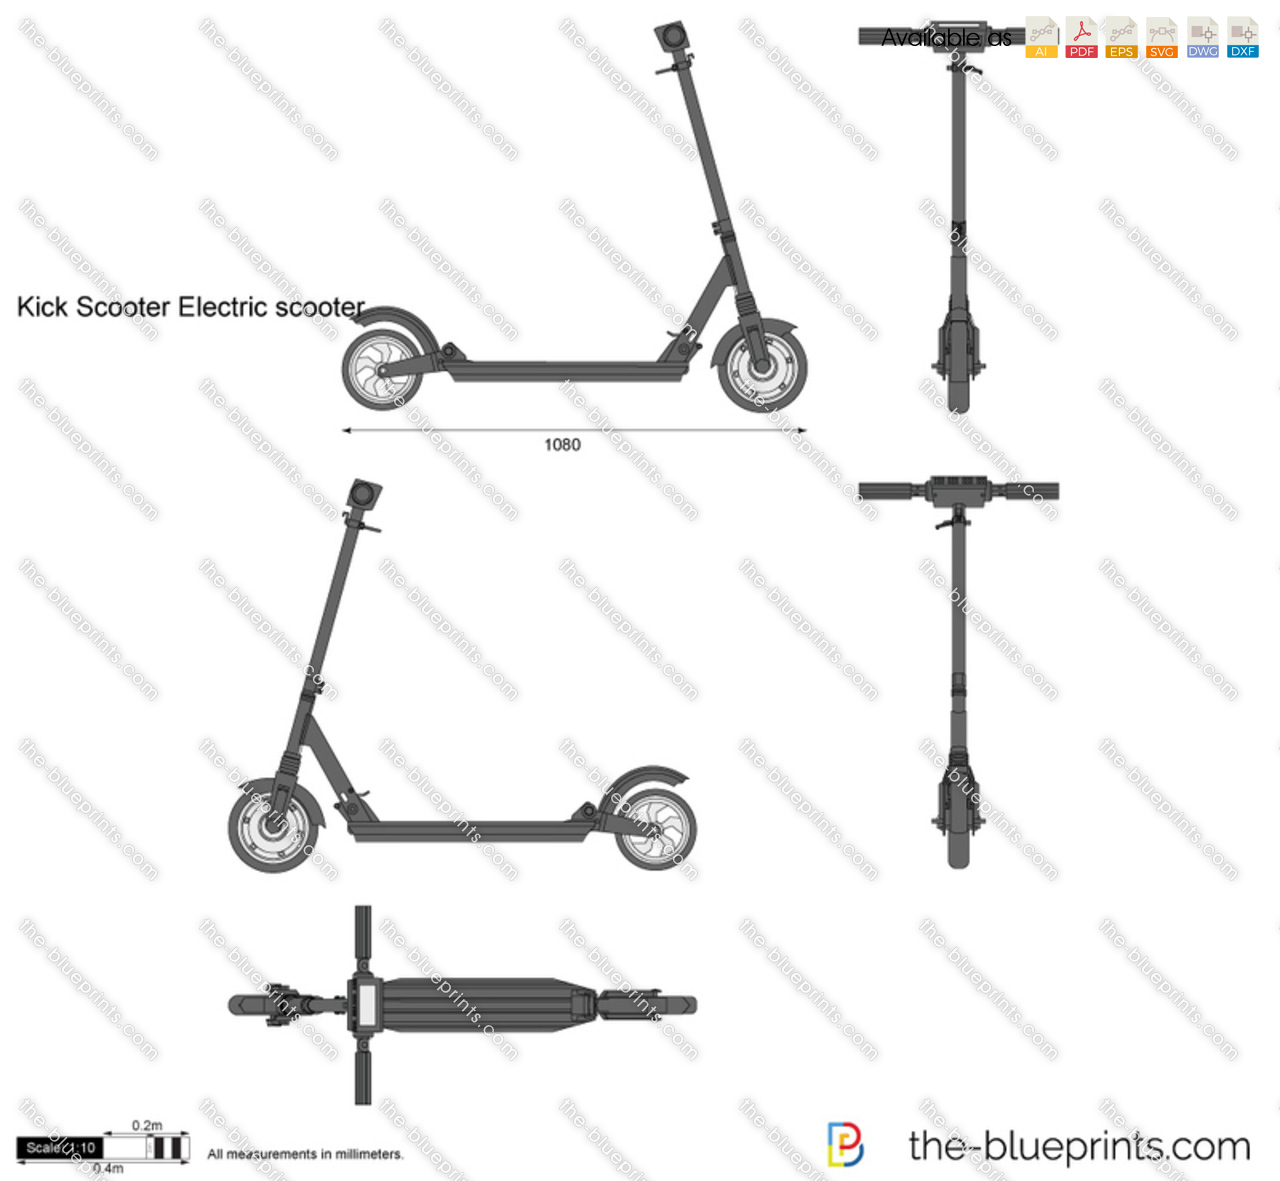 Kick Scooter Electric scooter